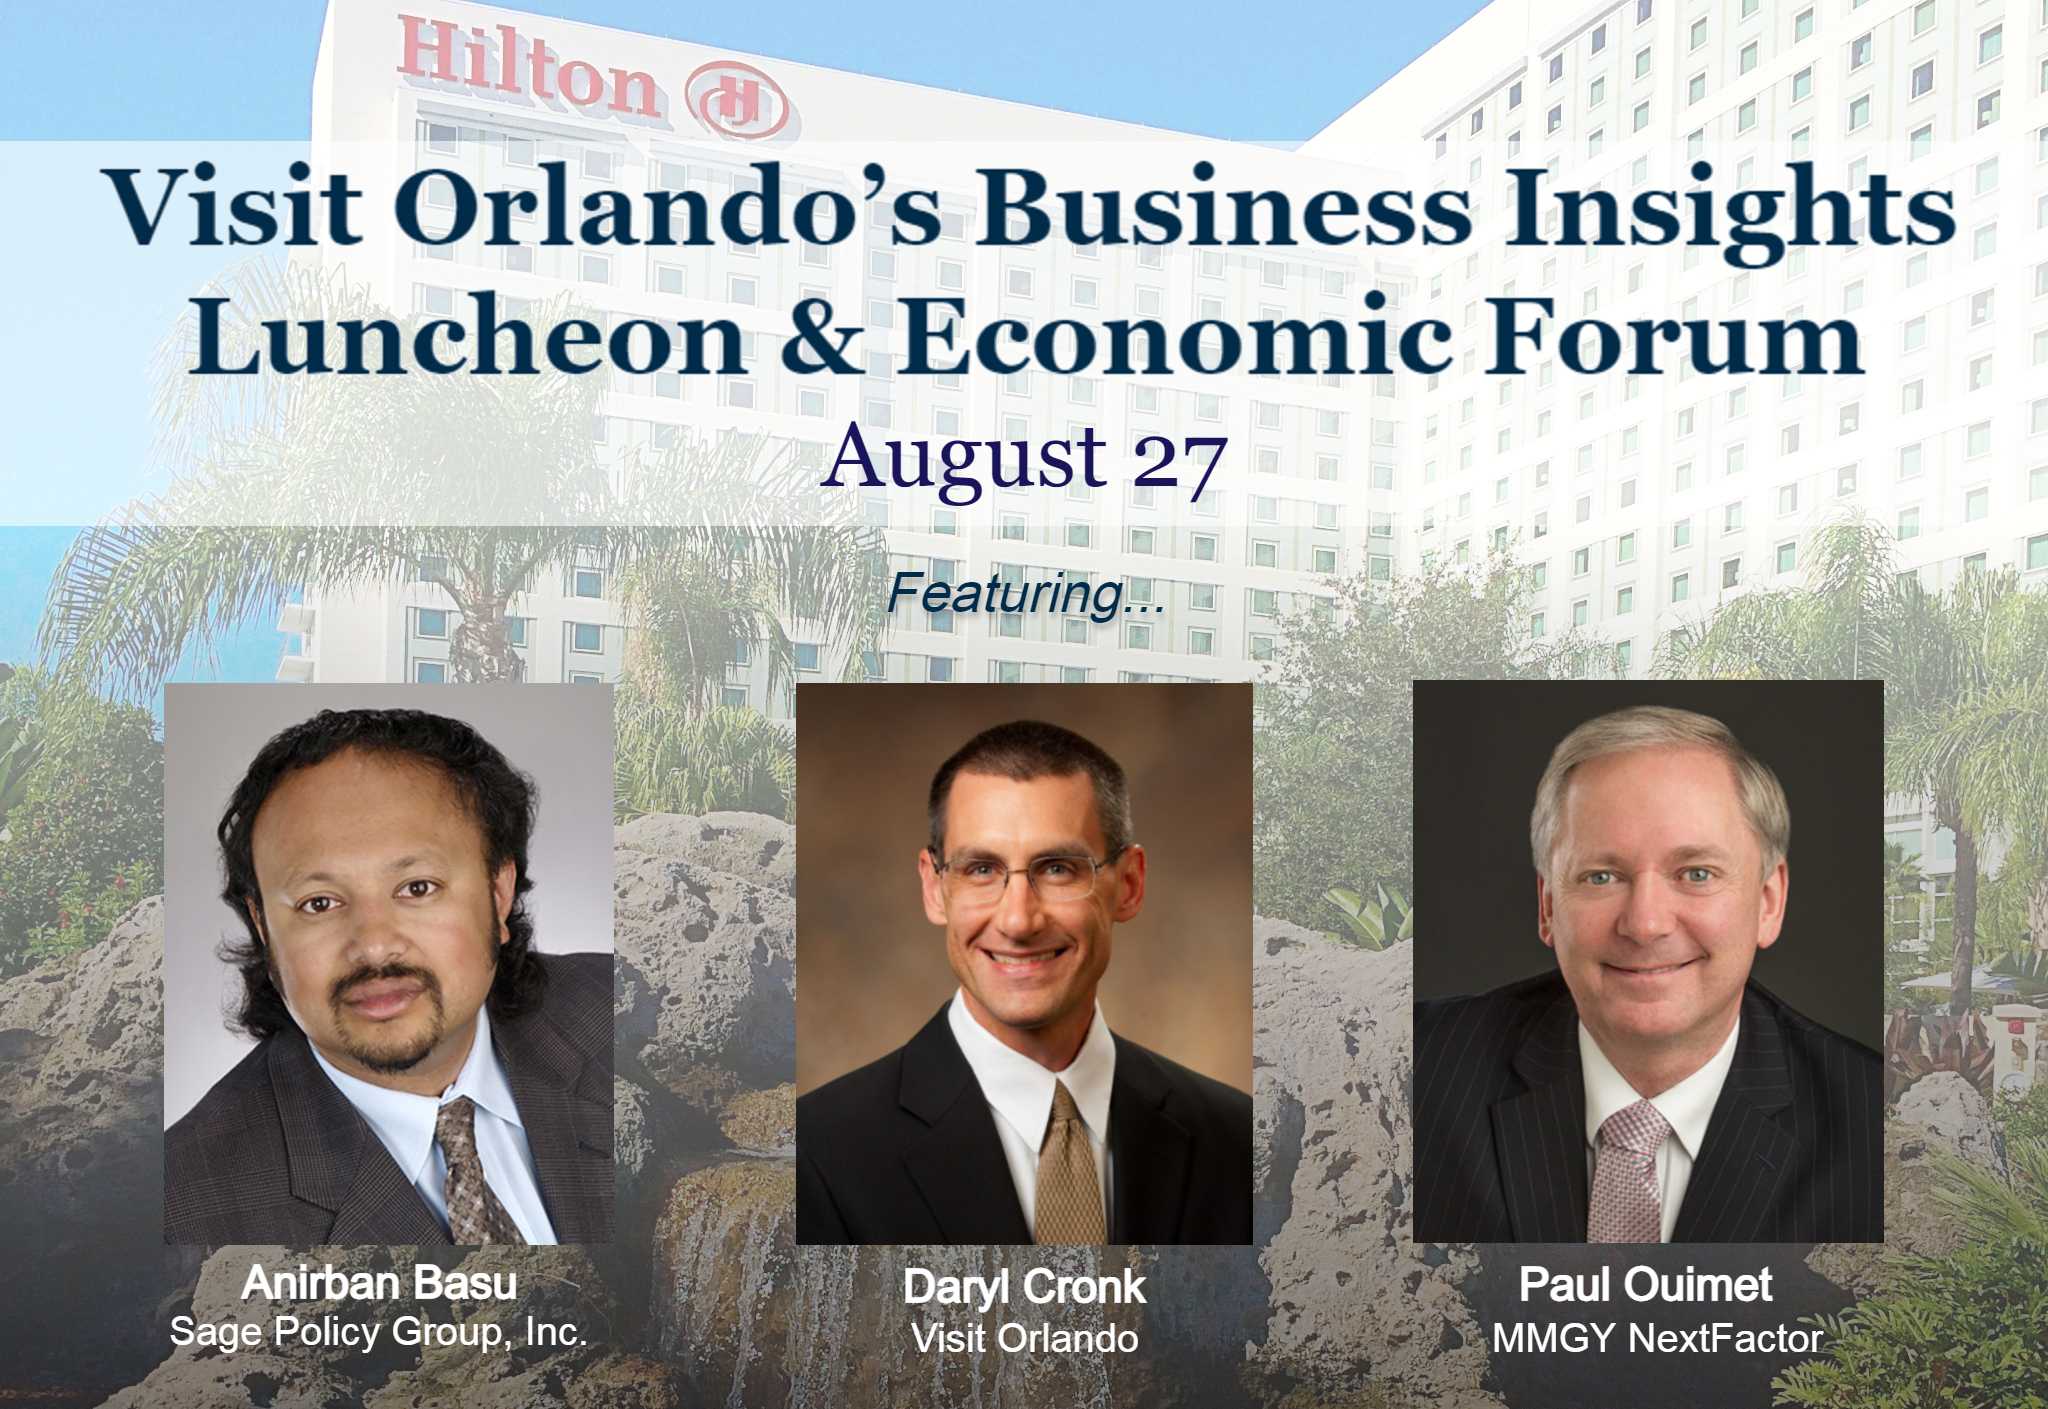 Sign up now for Visit Orlando's annual Business Insights Luncheon & Economic Forum